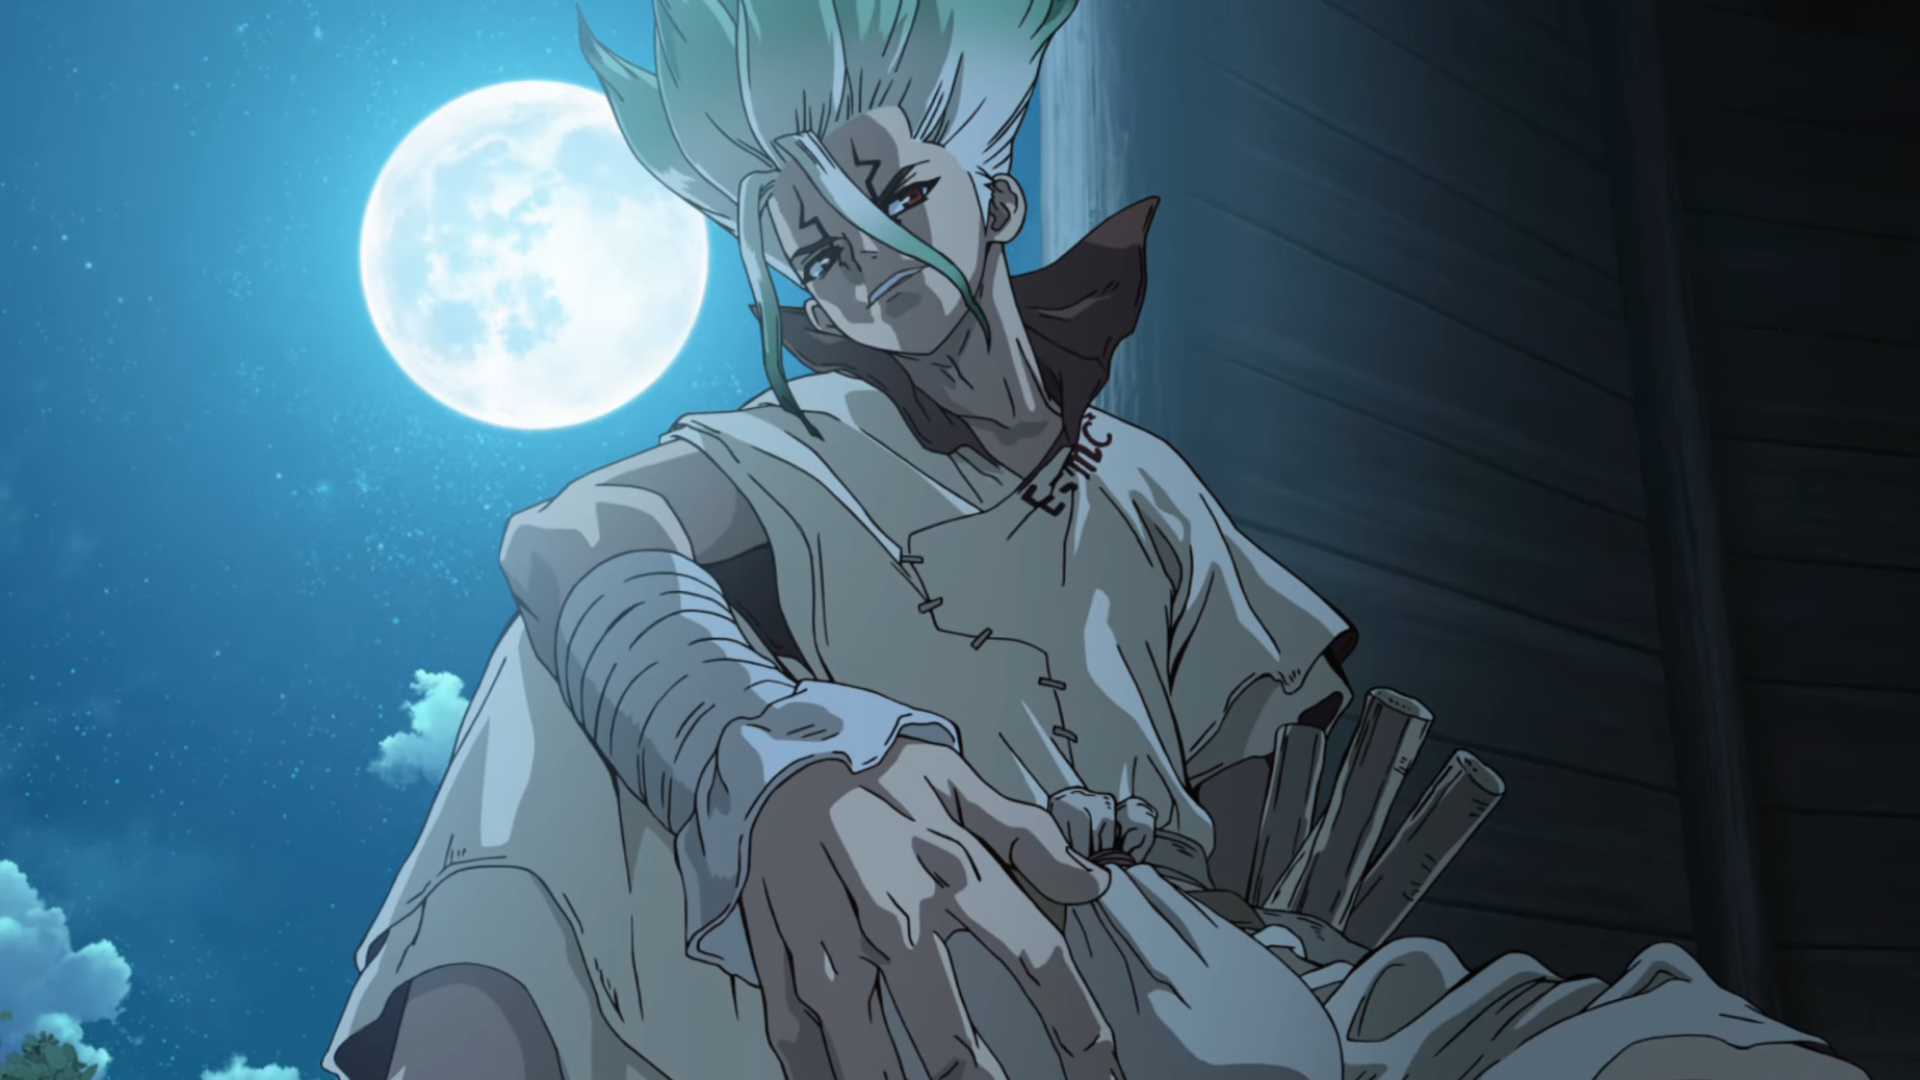 Dr Stone season 3 episode 5 release time, preview trailer and caption